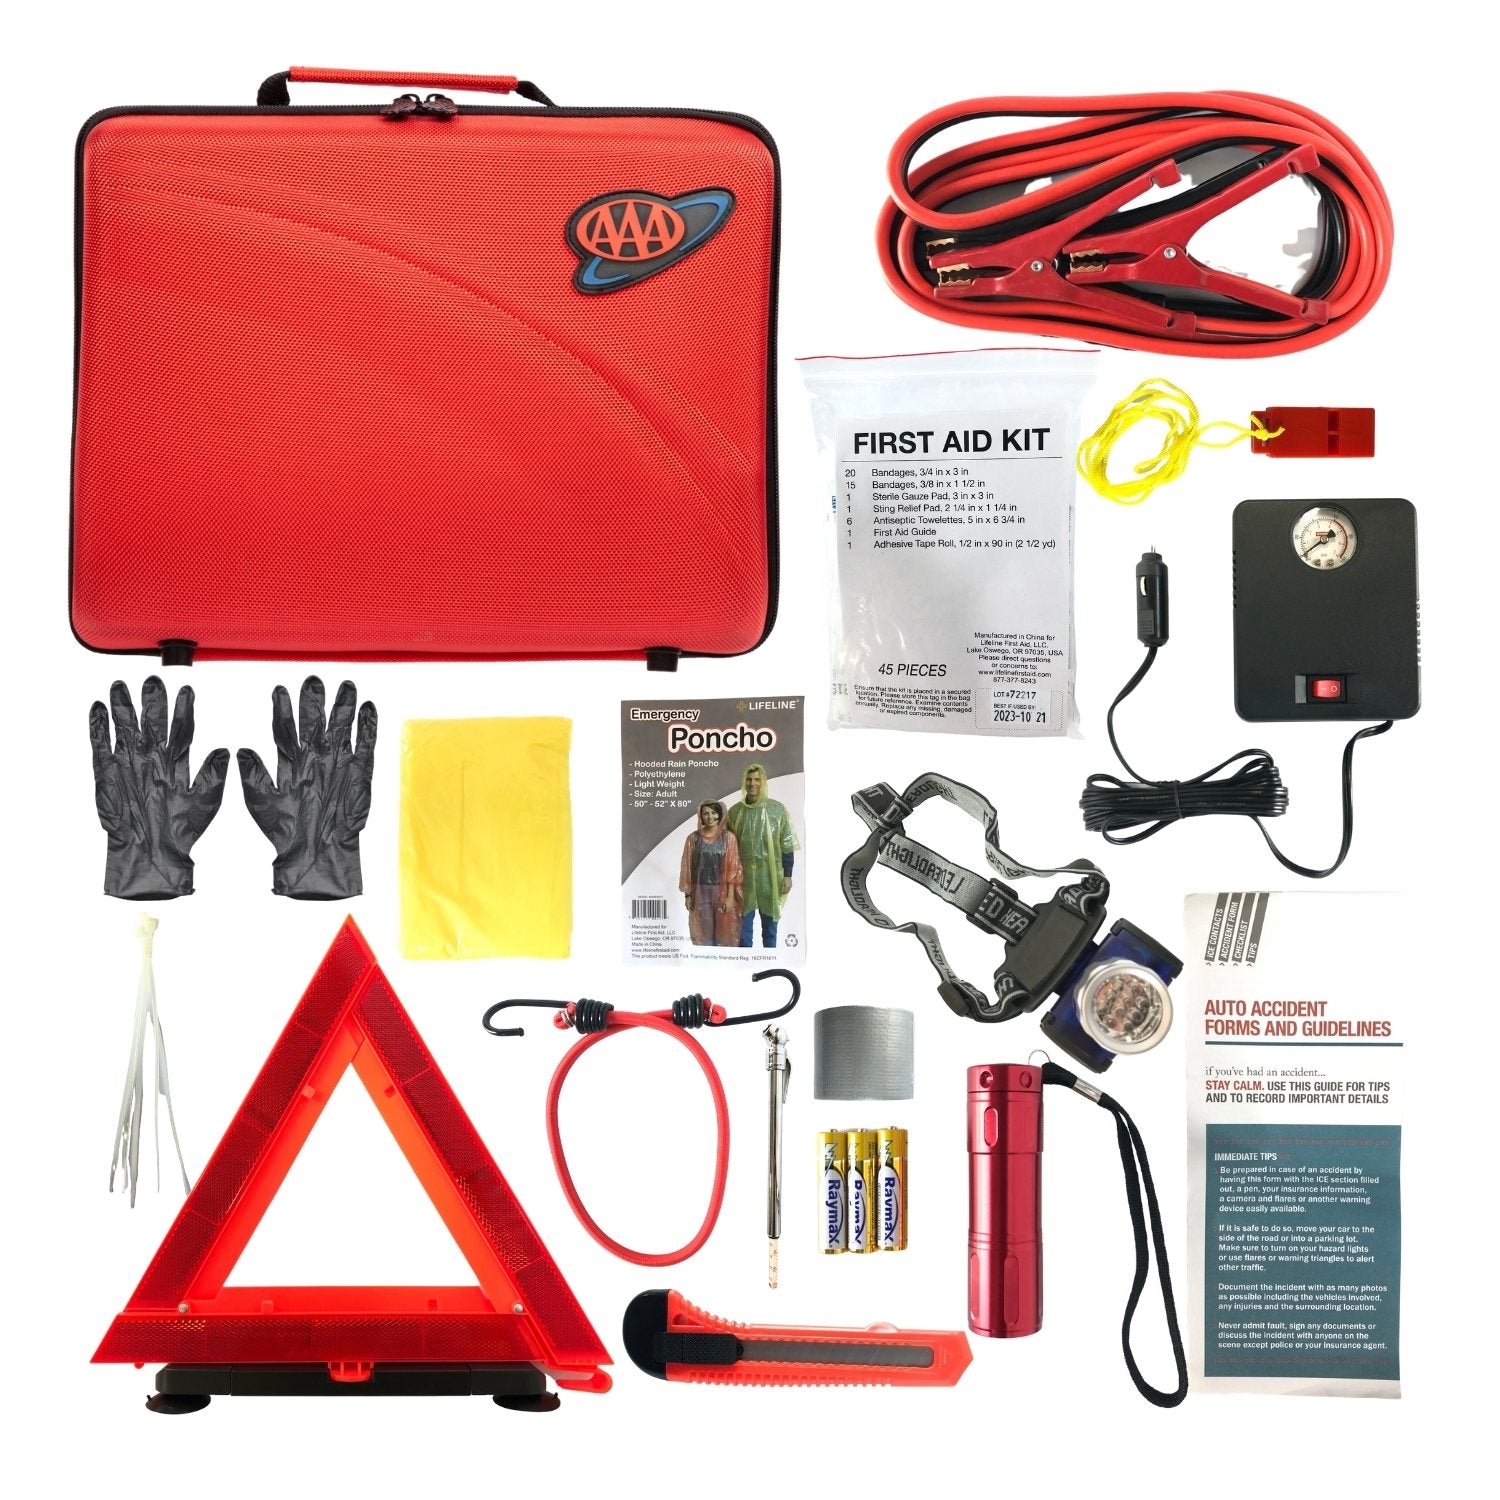 Ready 2 Go Bag Compact Emergency Kit for All Disasters (Earthquakes,  Hurricanes, Wildfires + More) : Amazon.in: Health & Personal Care